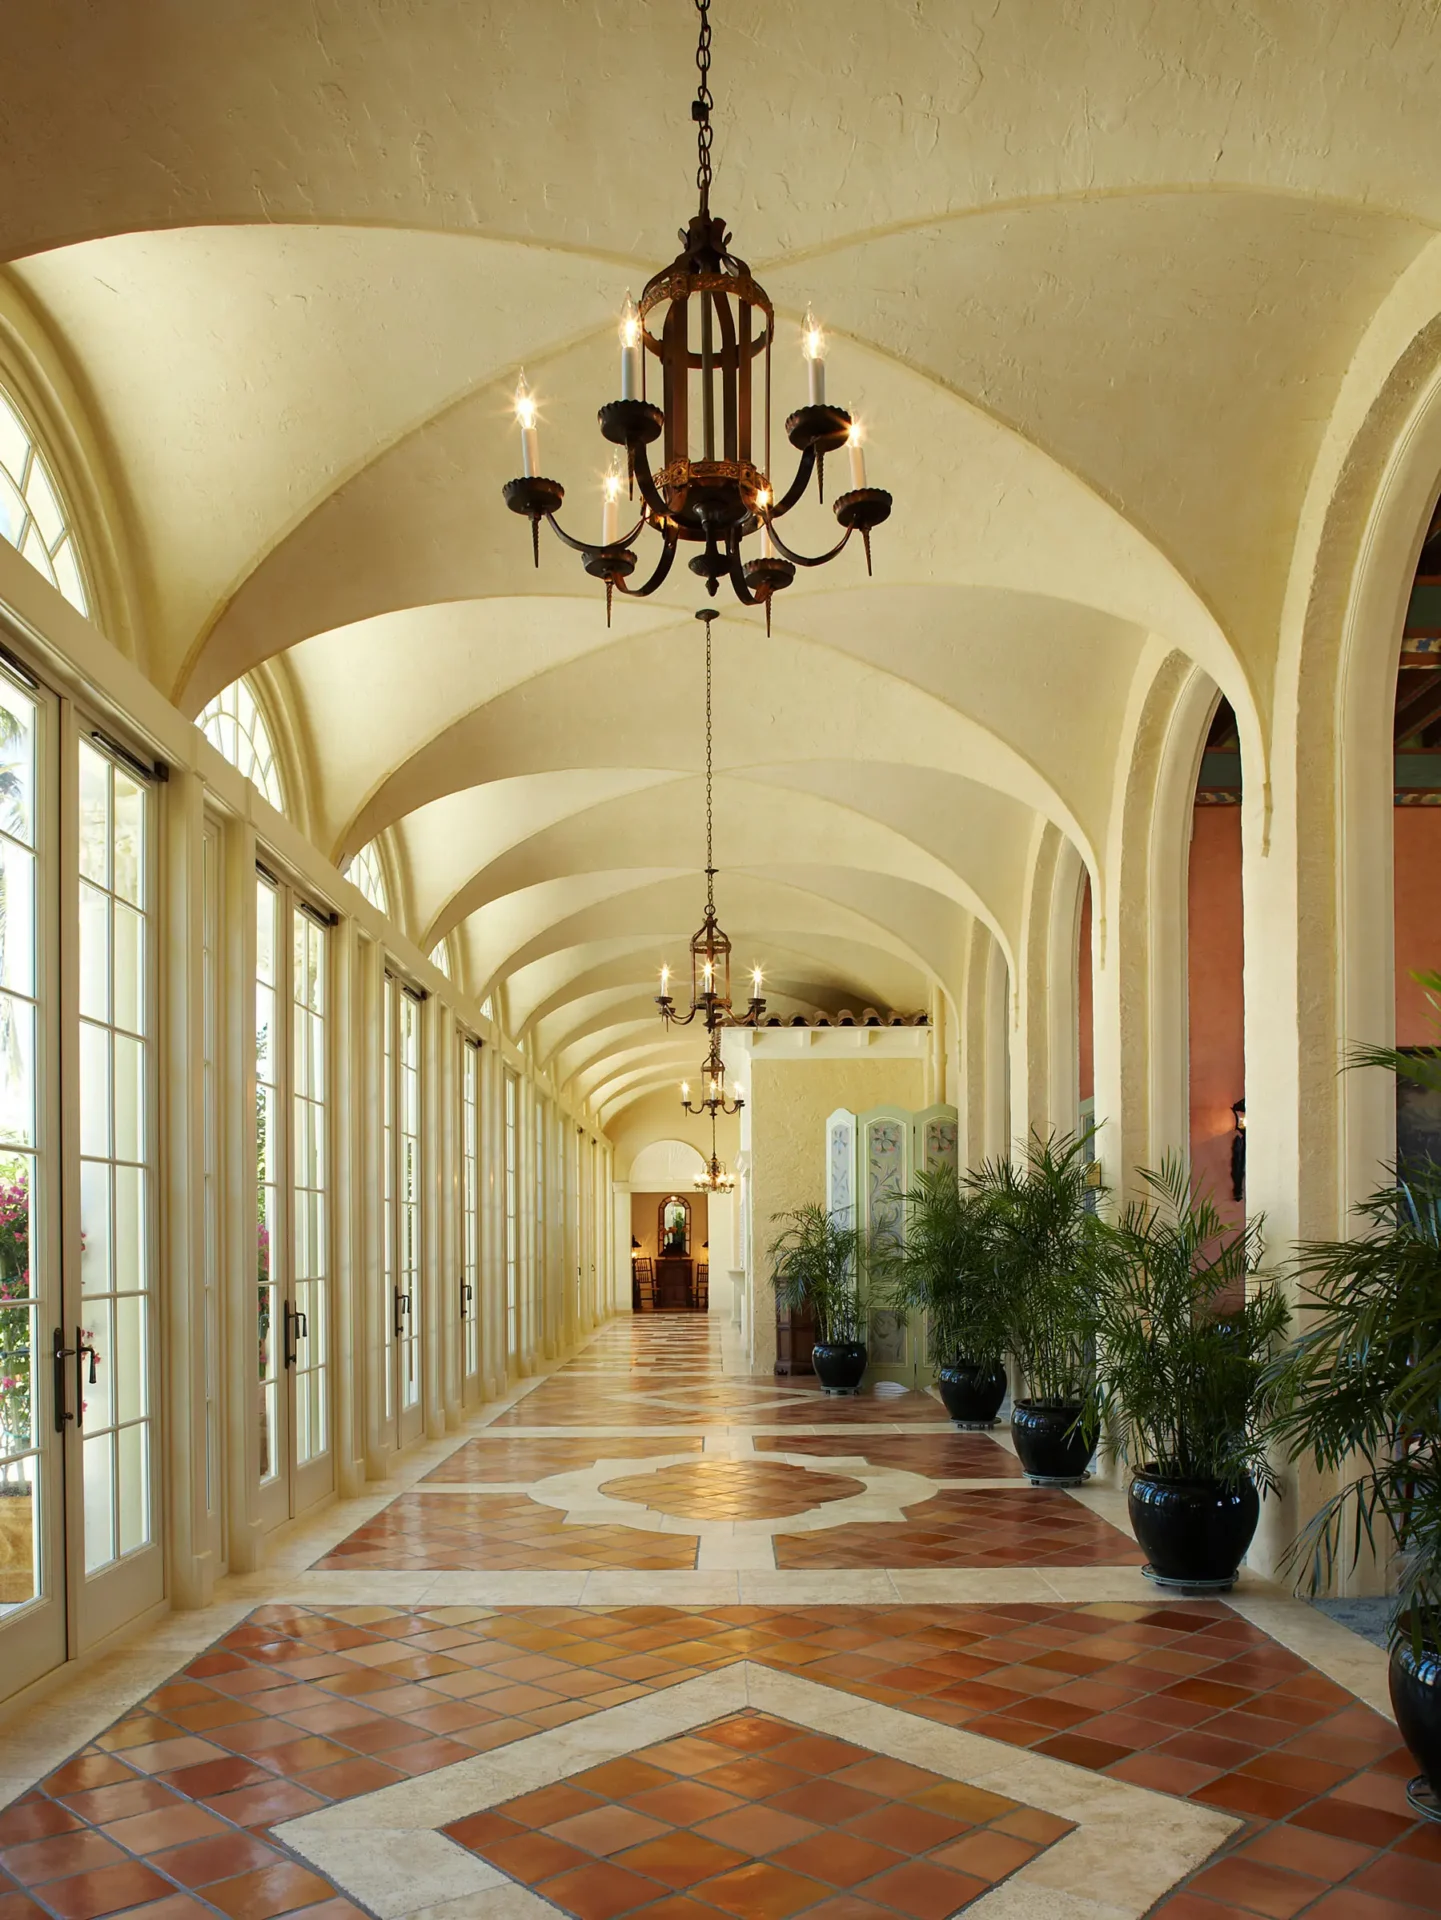 A long hallway with potted plants and large windows.